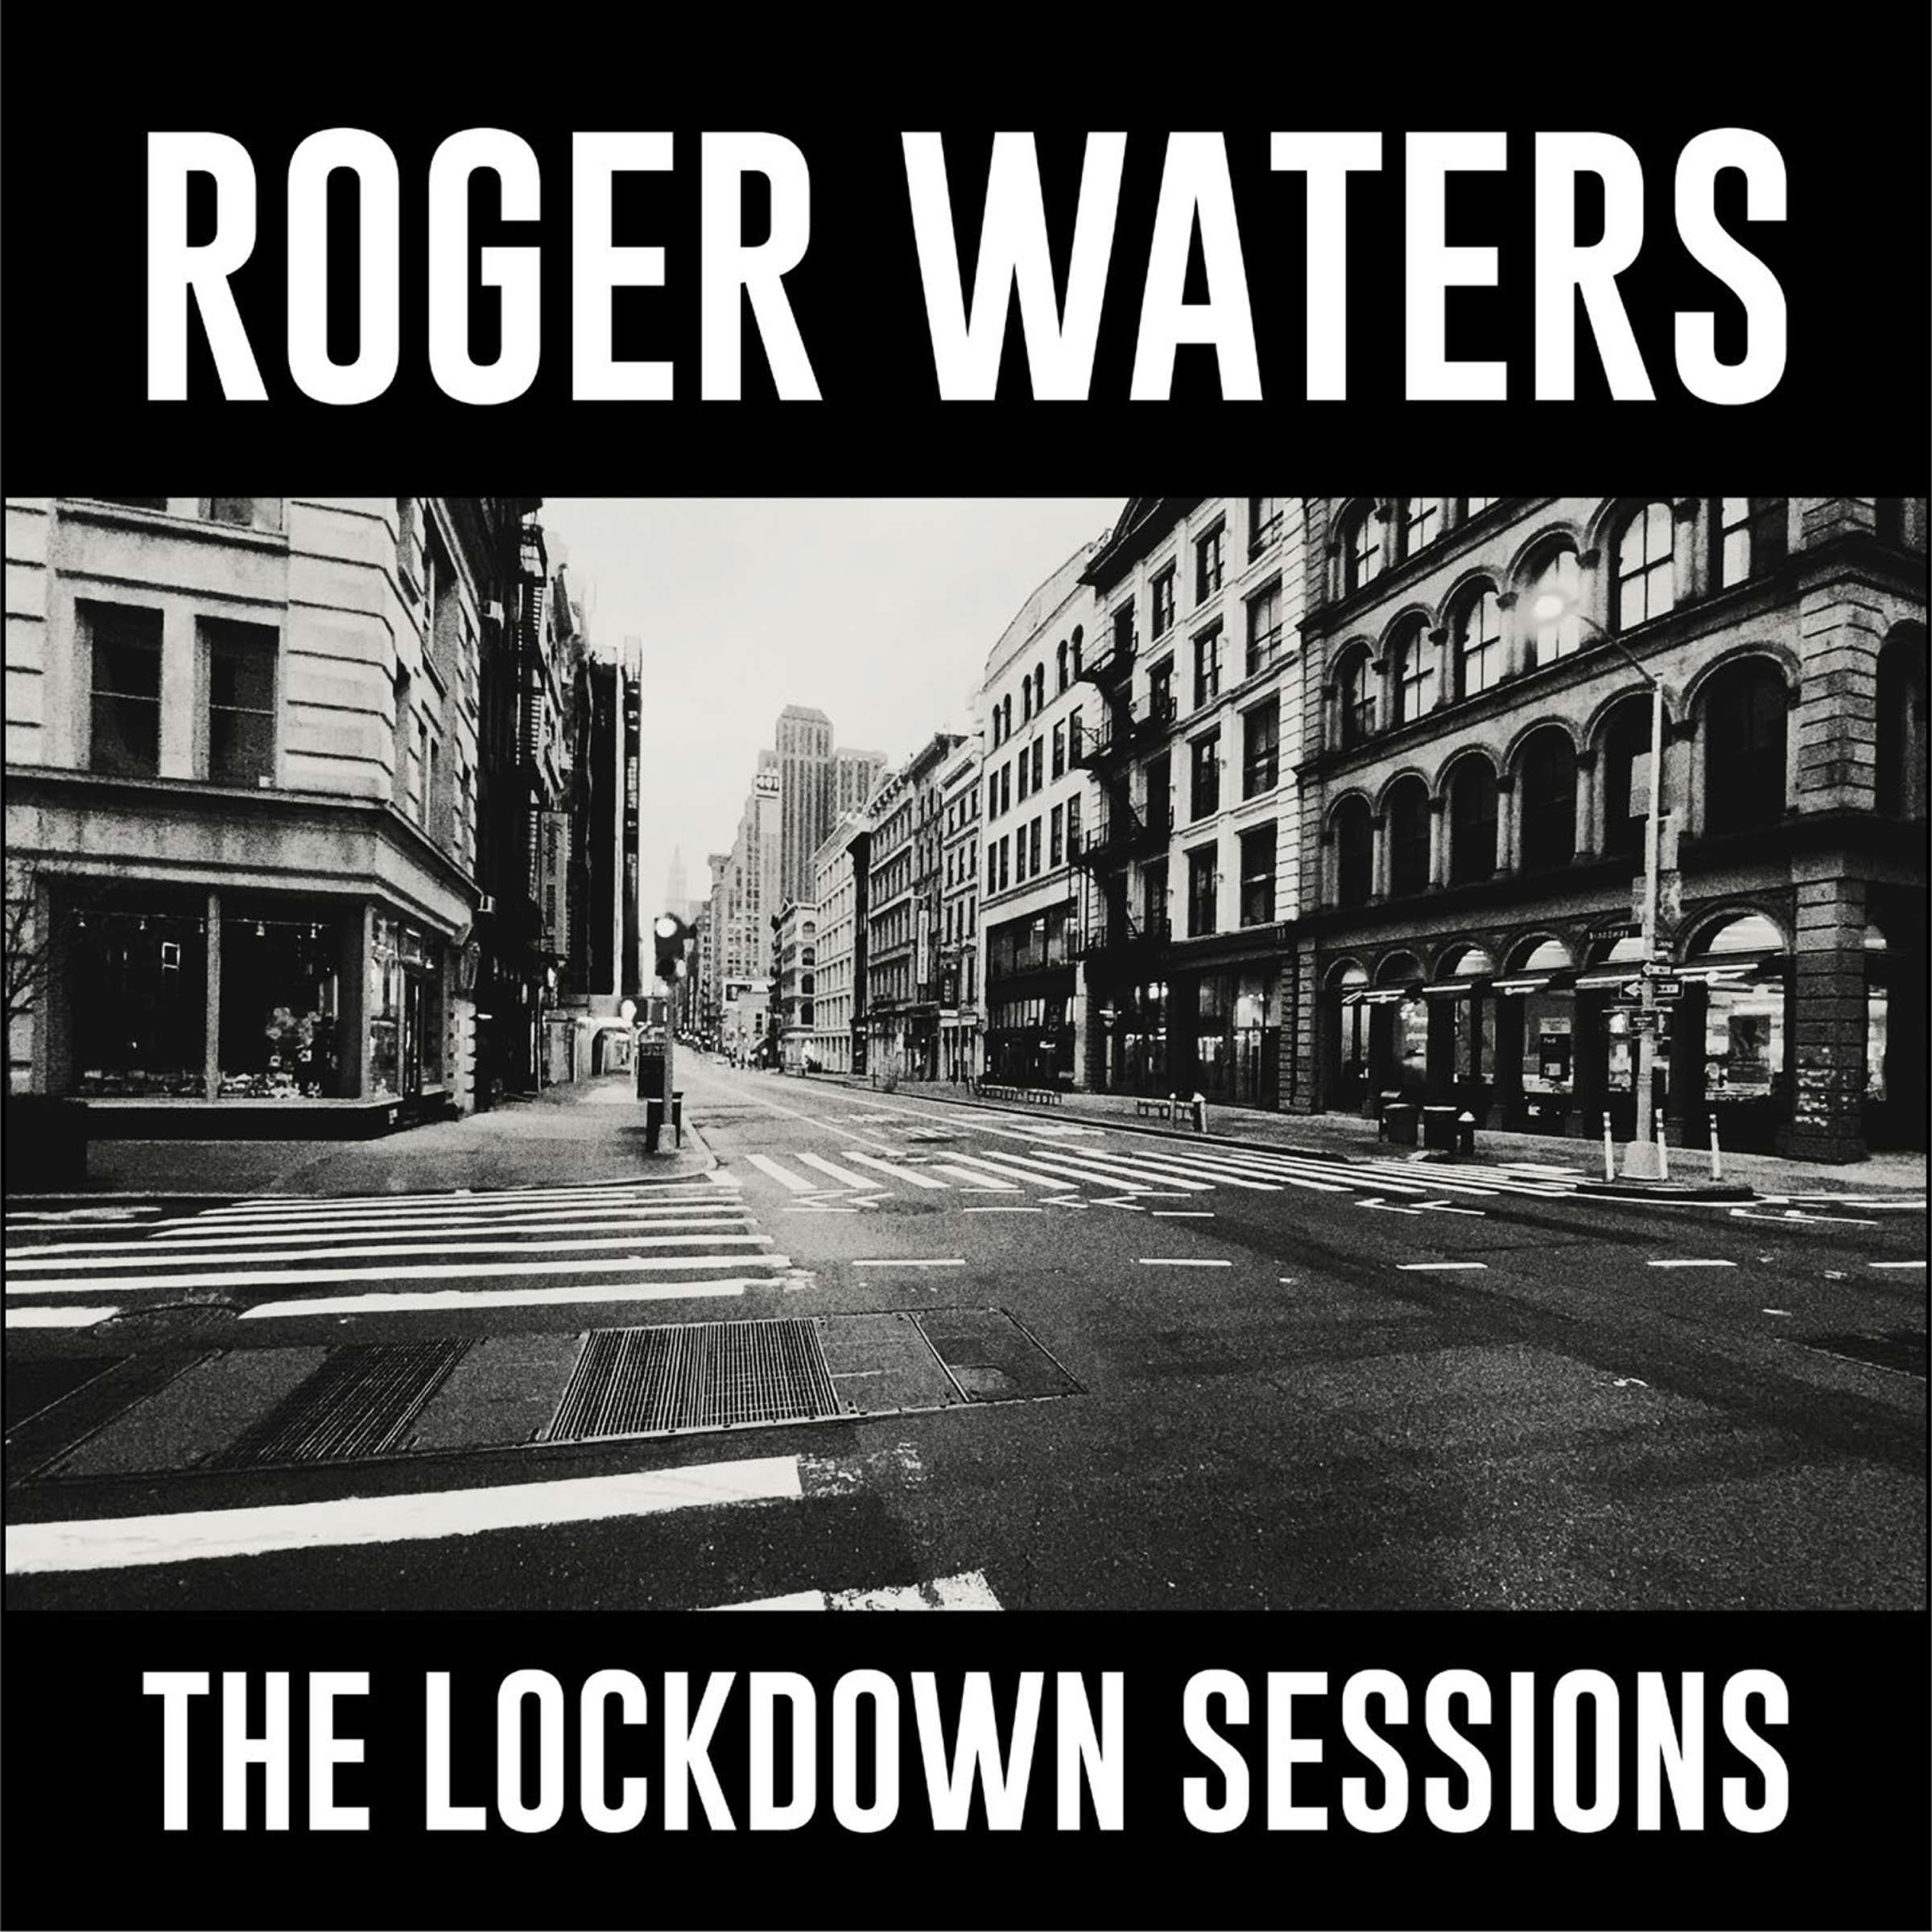 Roger Waters – The Lockdown Sessions (LP) цена и фото